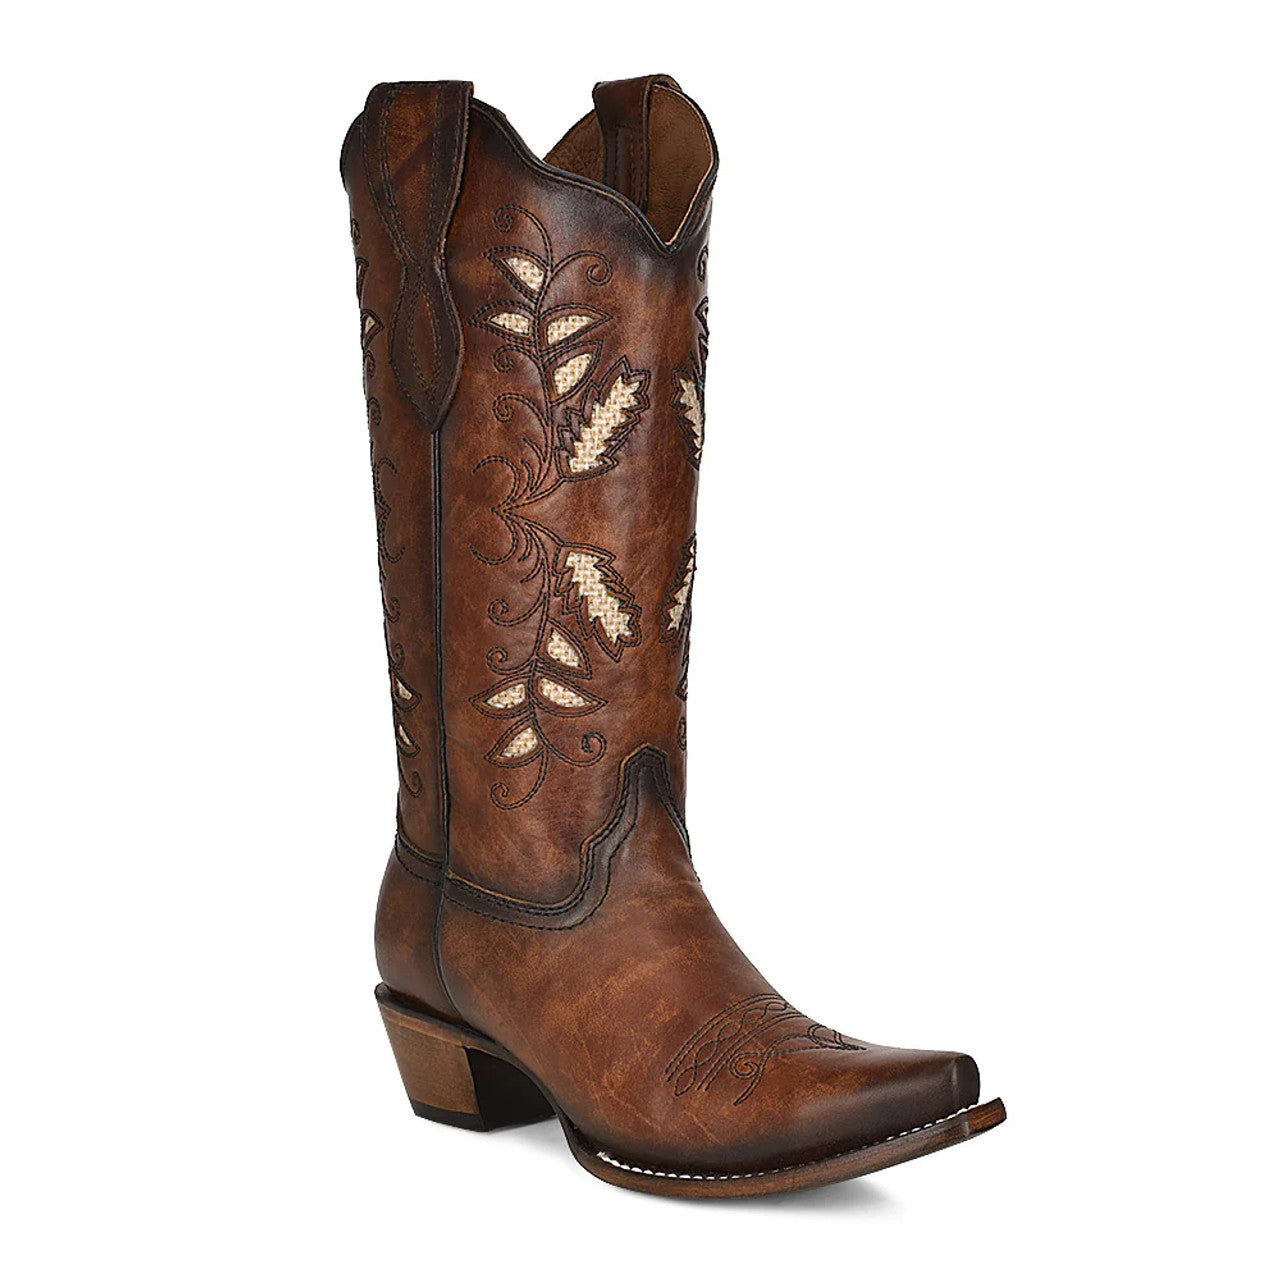 CIRCLE G L2071 WOMEN'S BROWN EMBROIDERED BOOTS